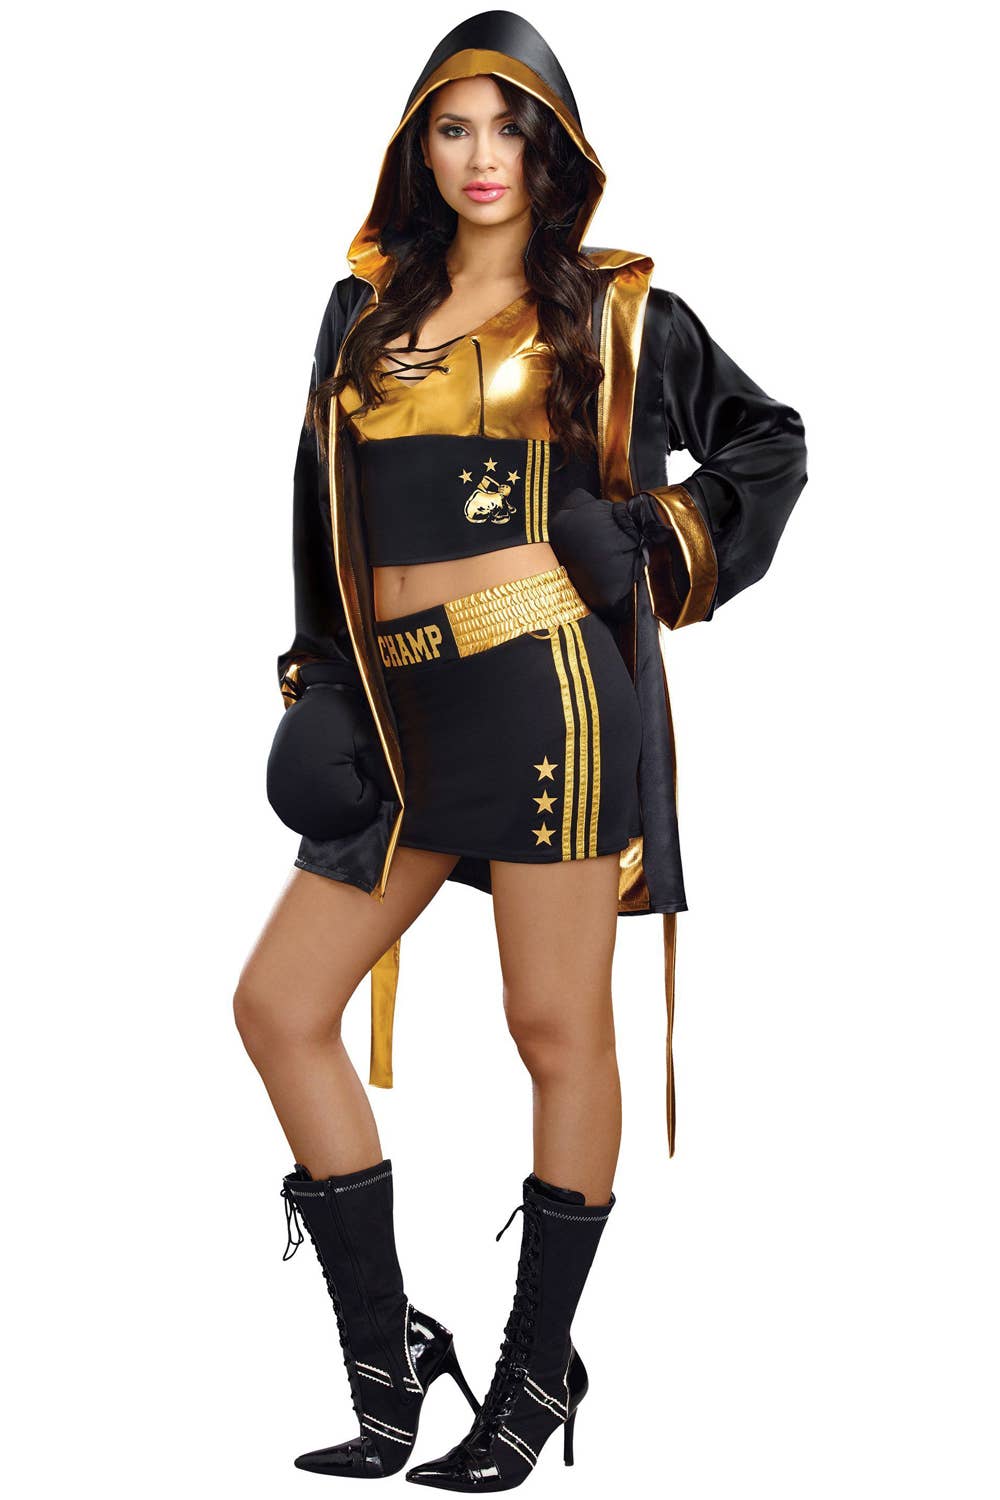 Women's Sexy Black and Gold Boxer Costume - Main Image